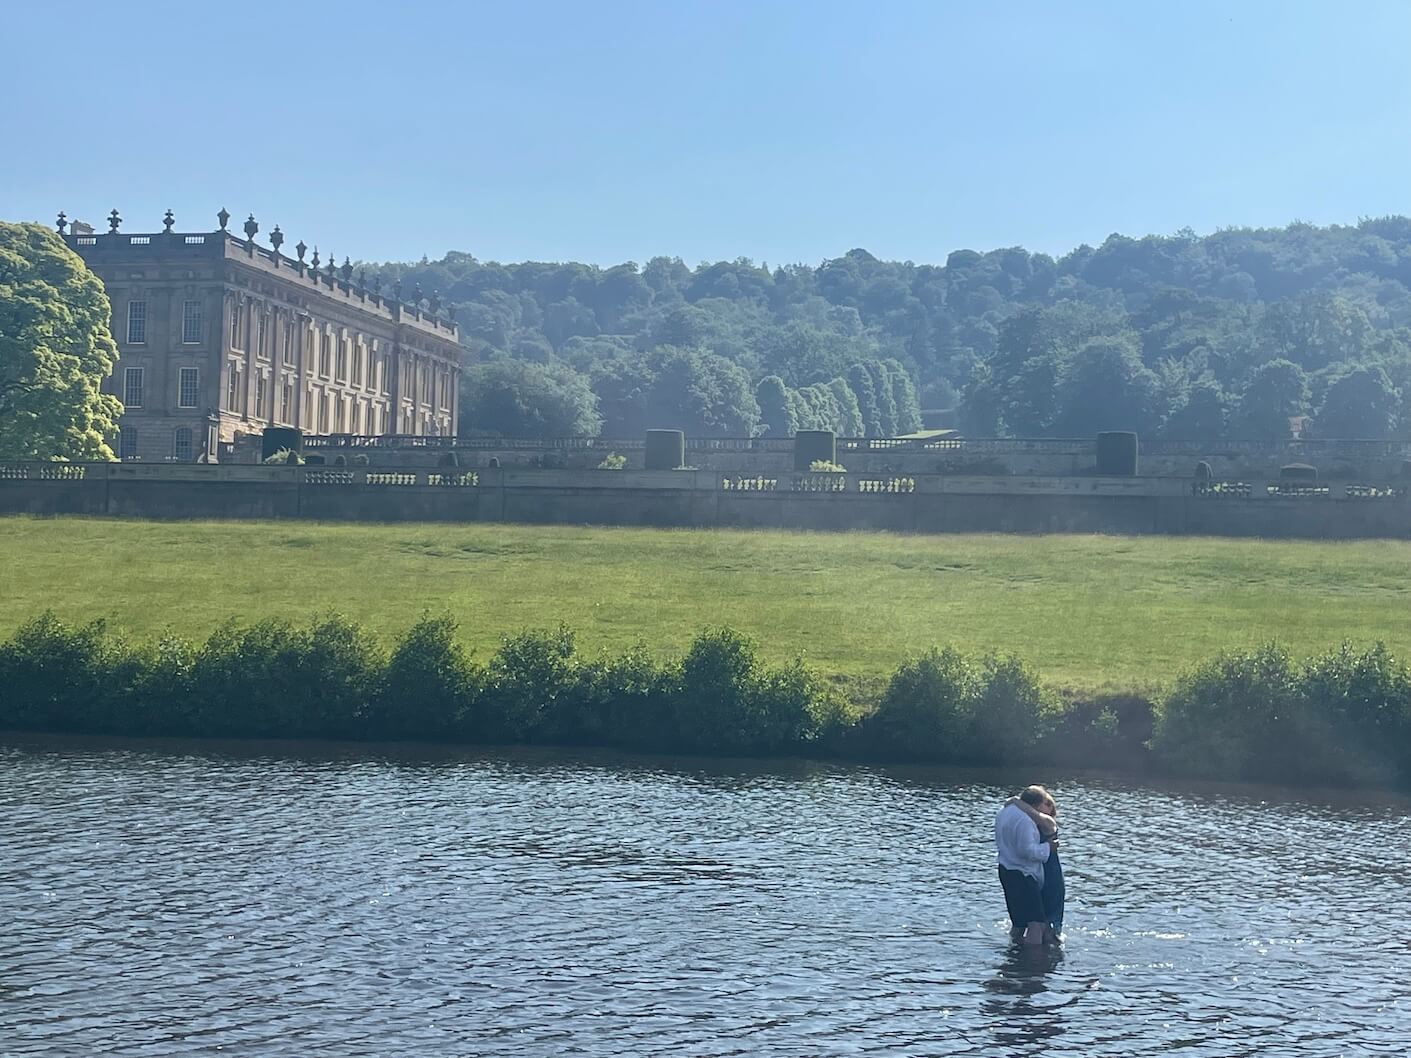 wild swimming and romance in the River Derwent which runs past Chatsworth House